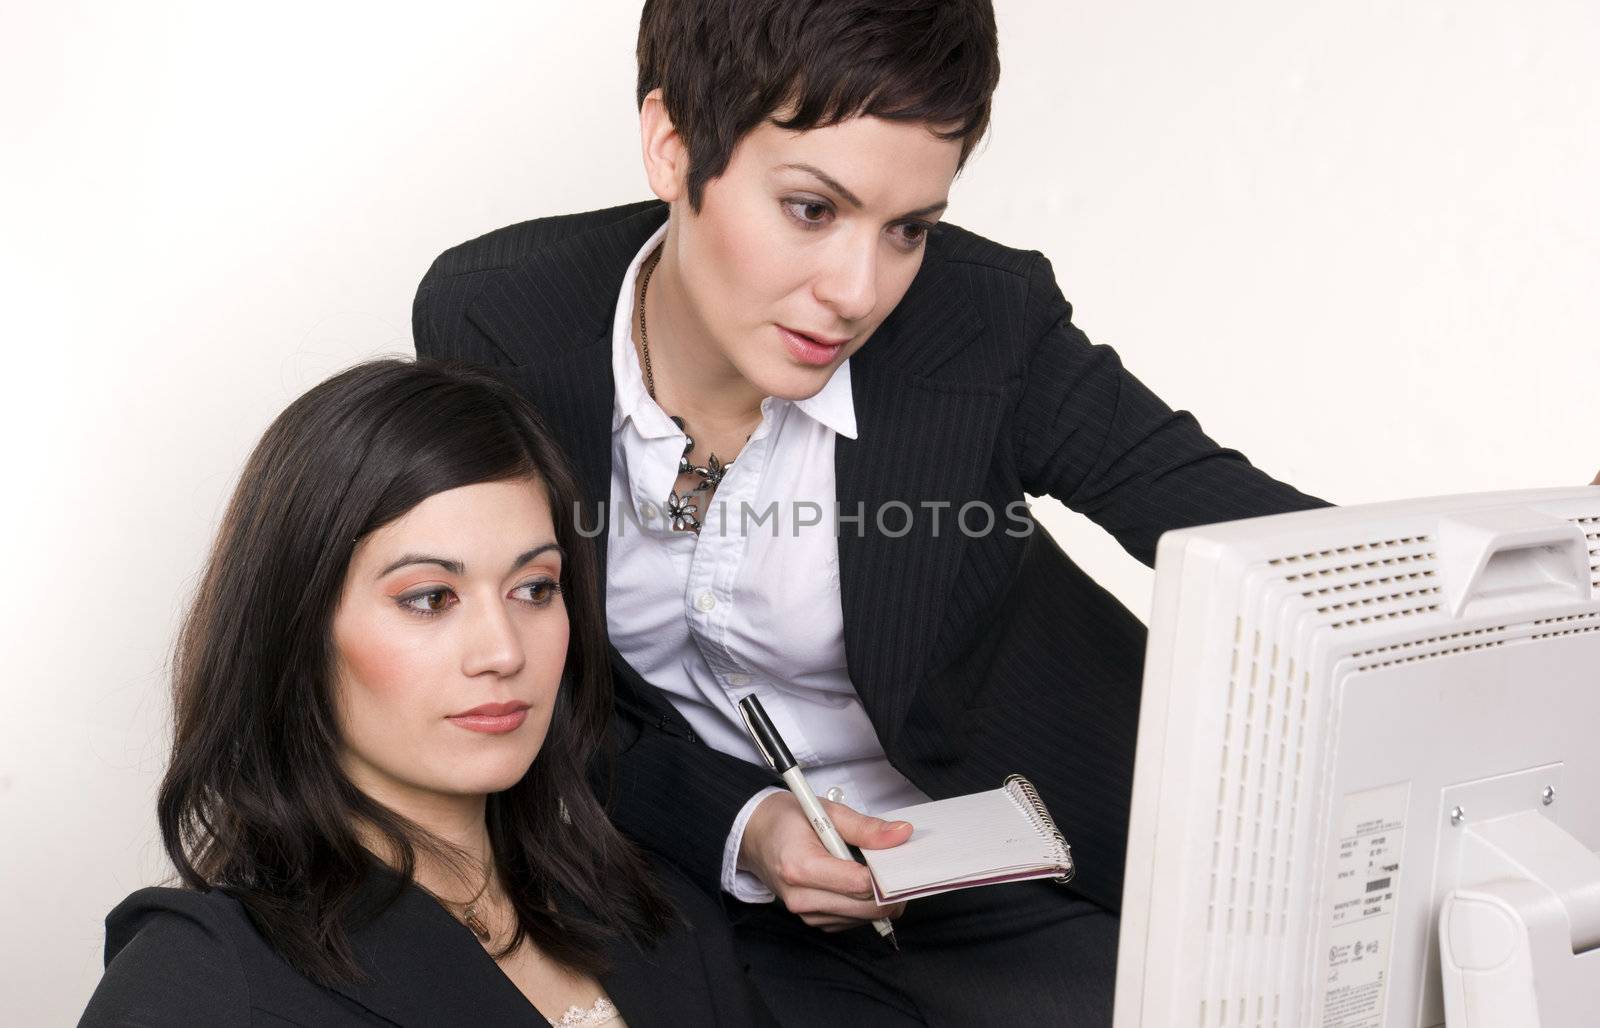 Two women collaborate at work